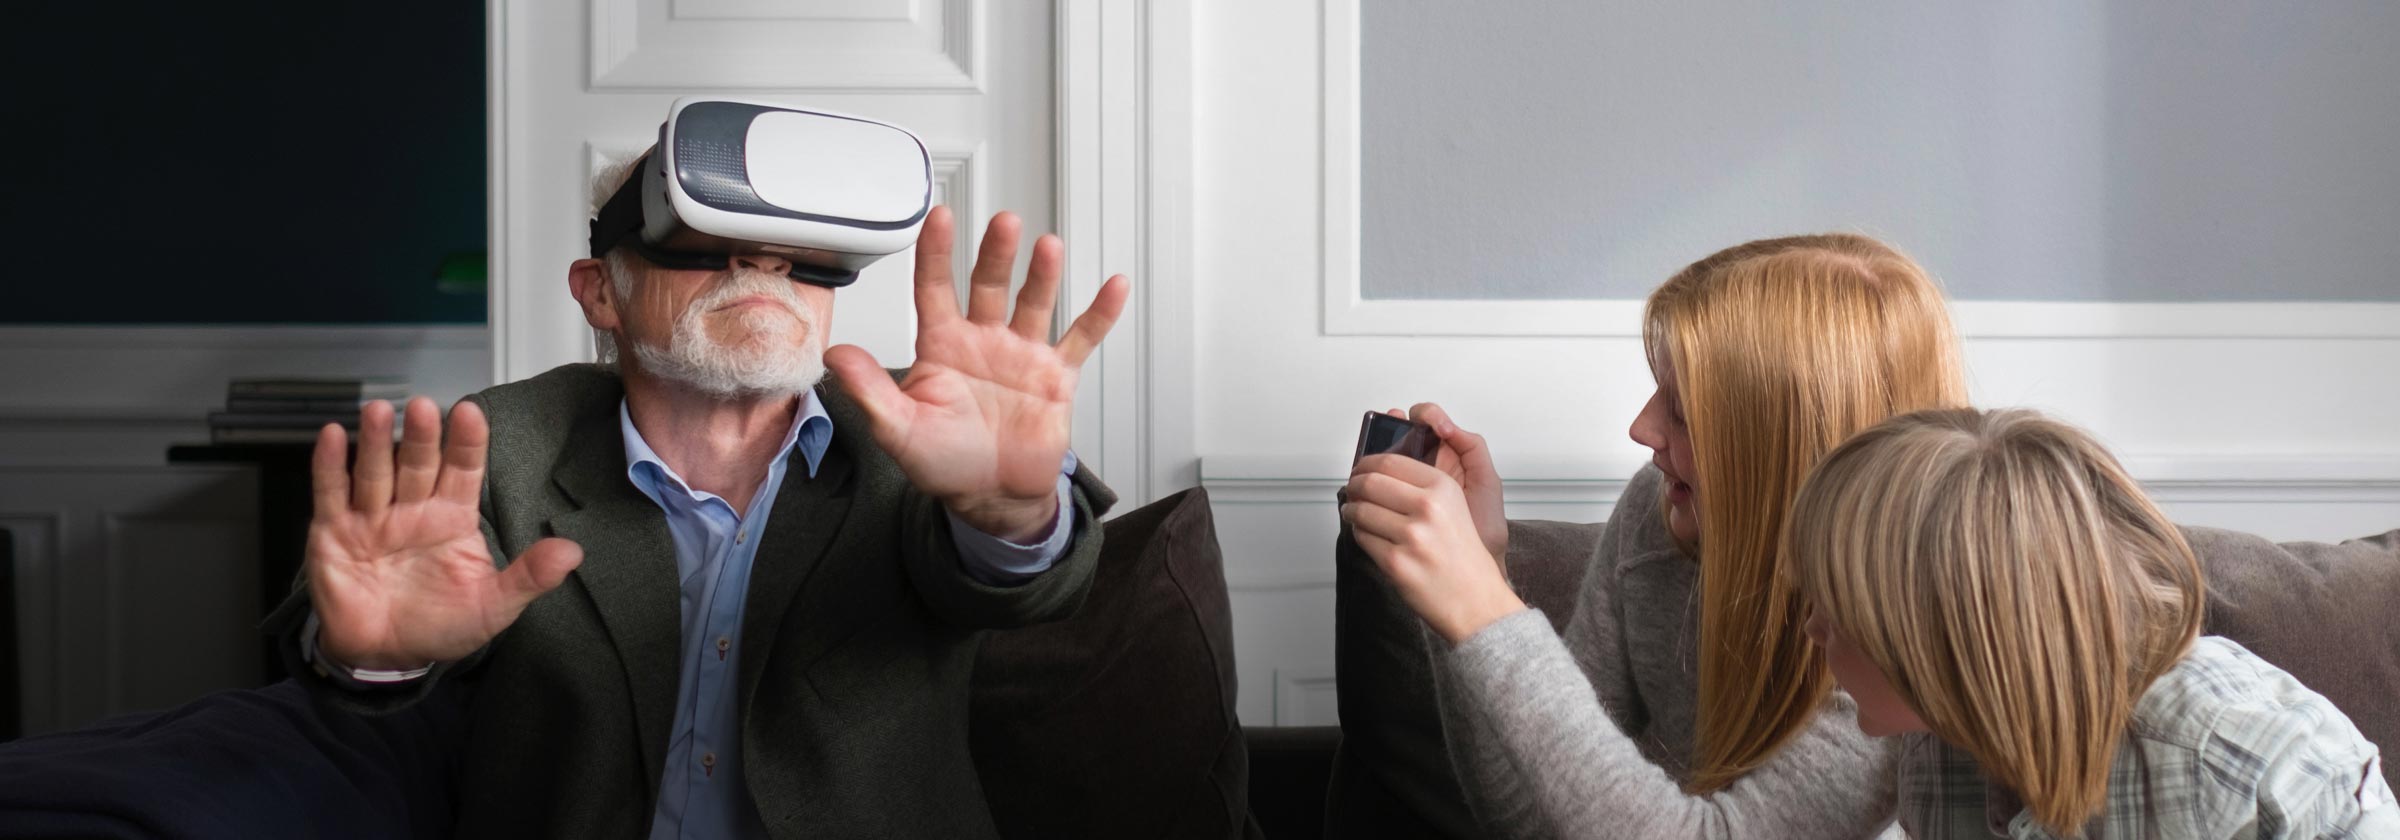 Family introducing grandfather to virtual reality technology